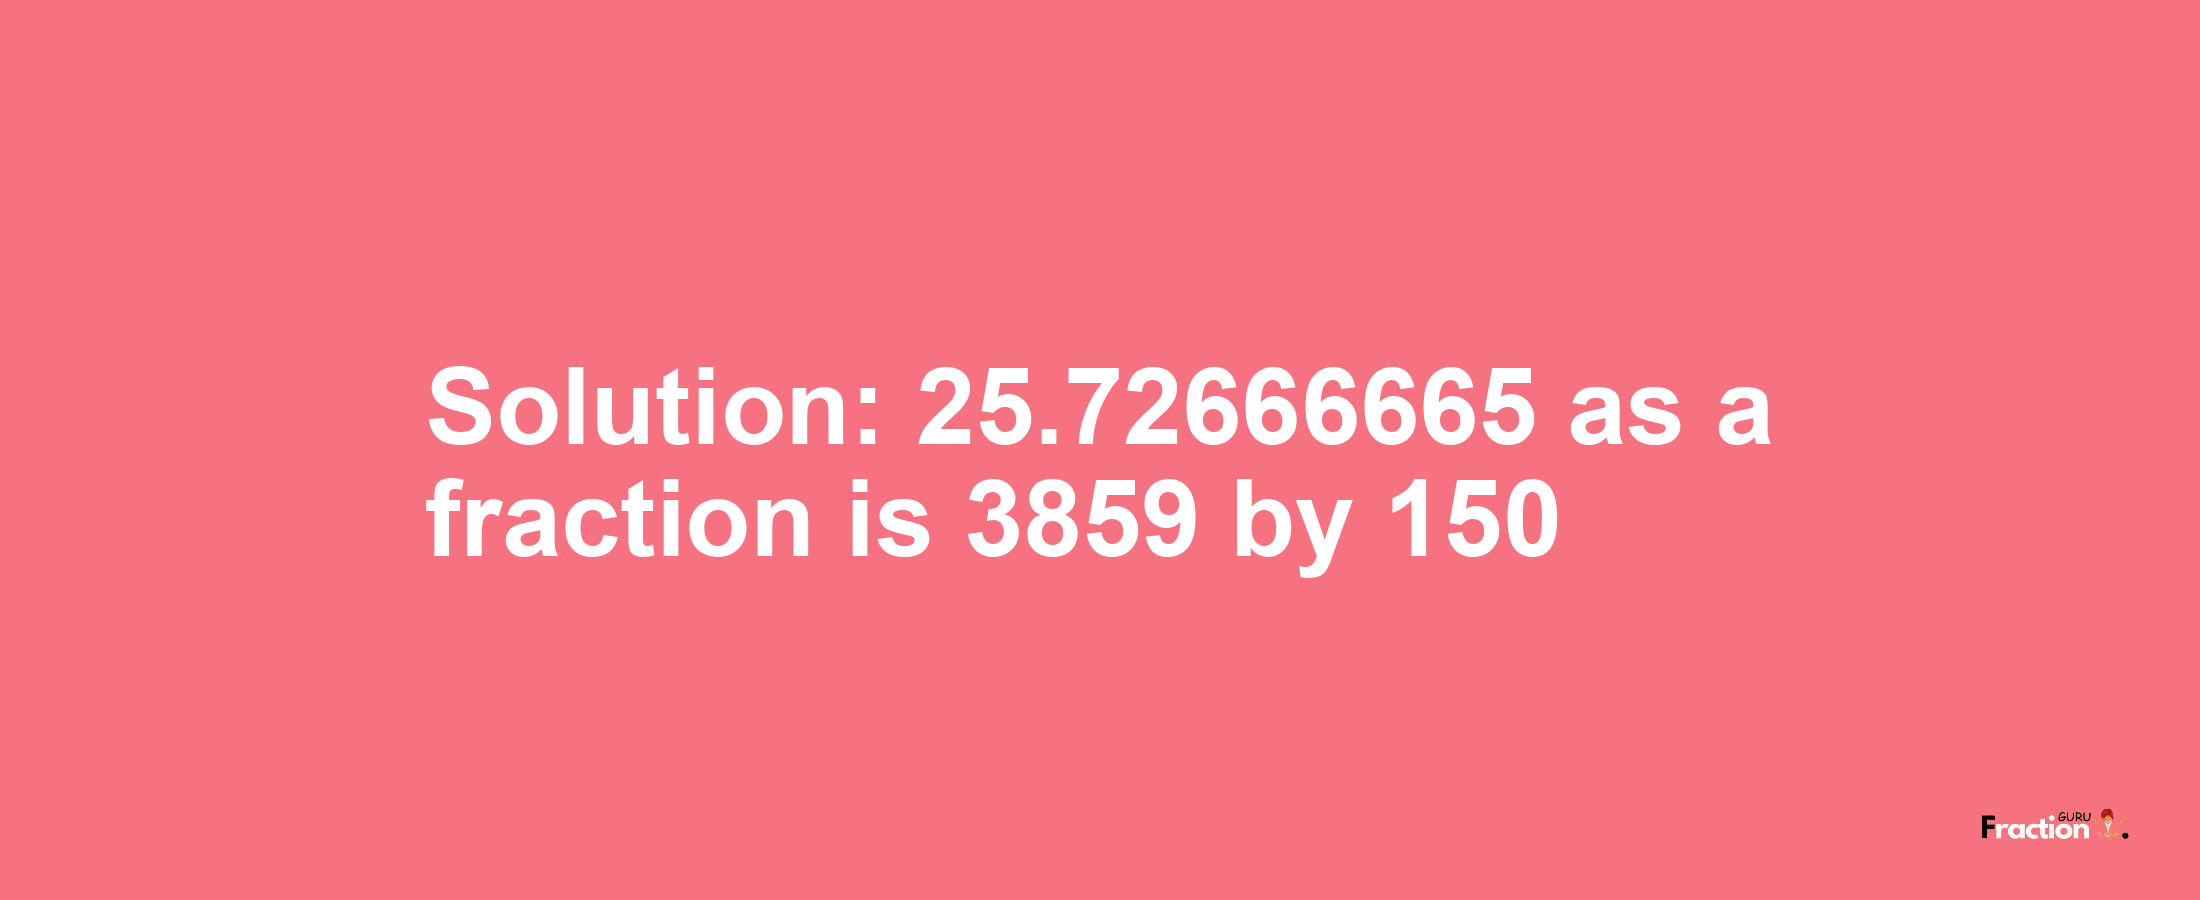 Solution:25.72666665 as a fraction is 3859/150